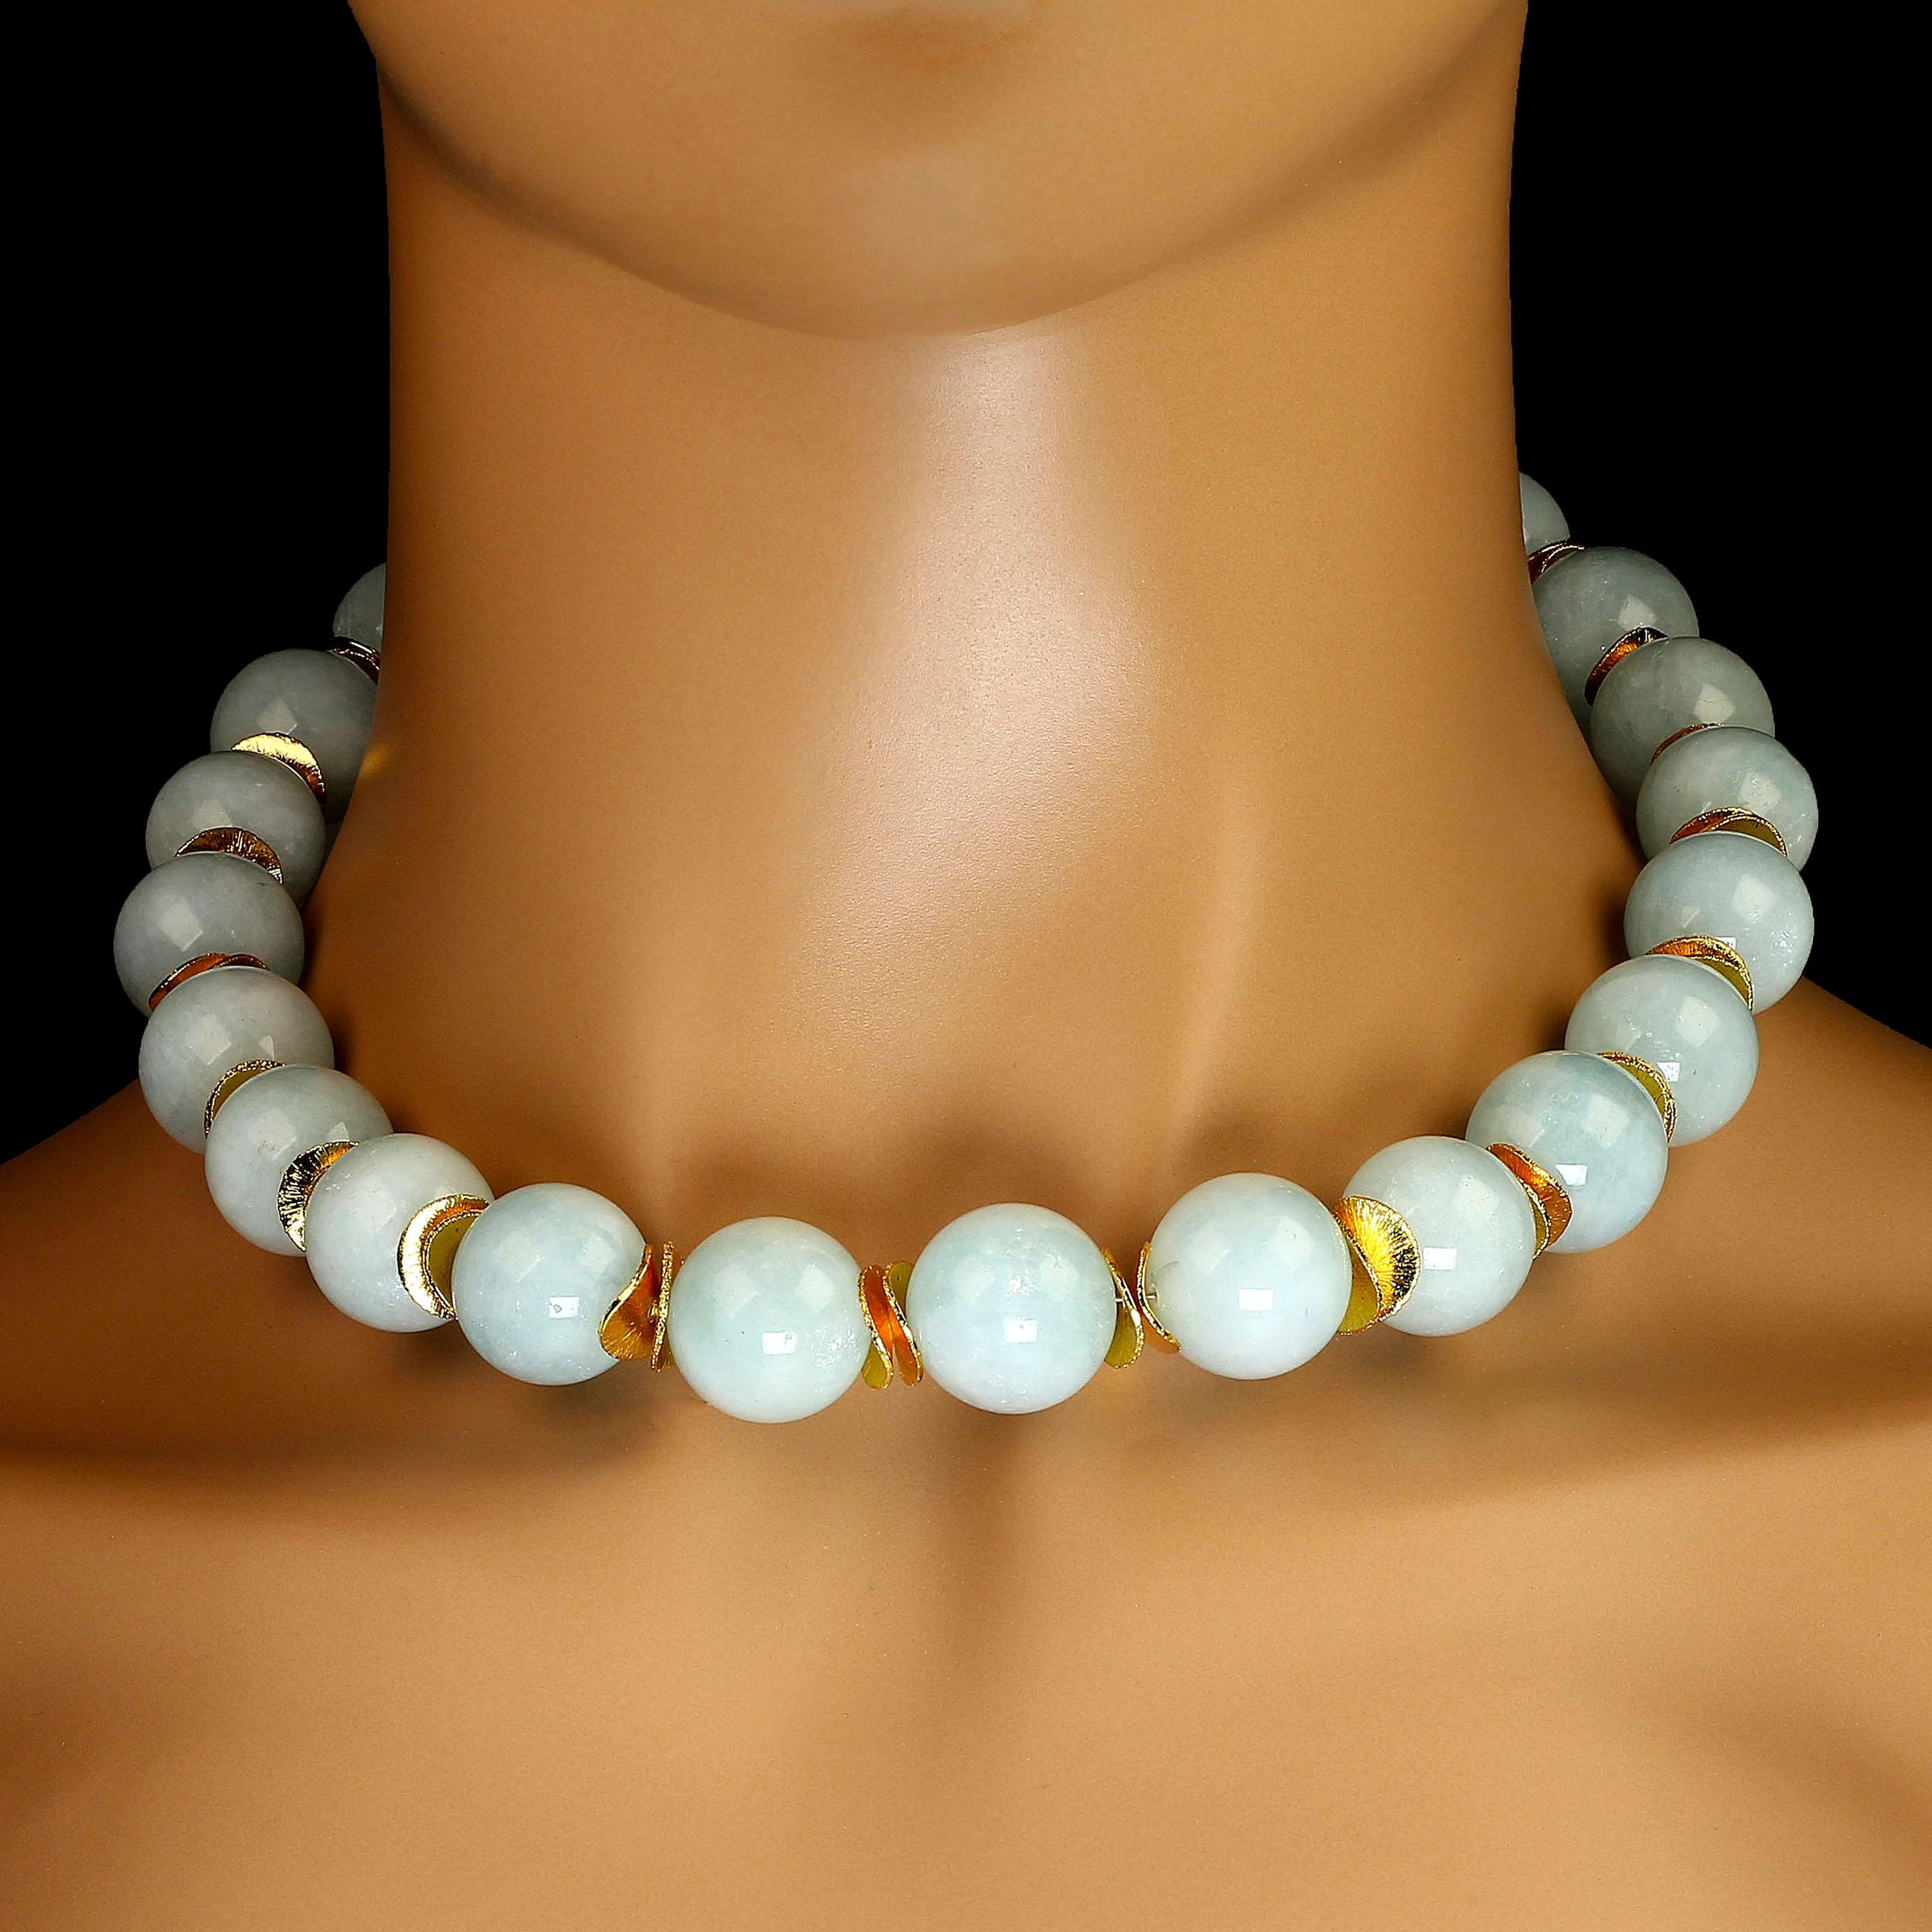 Artisan AJD Statement Aquamarine Choker with Goldy Accents March Birthstone